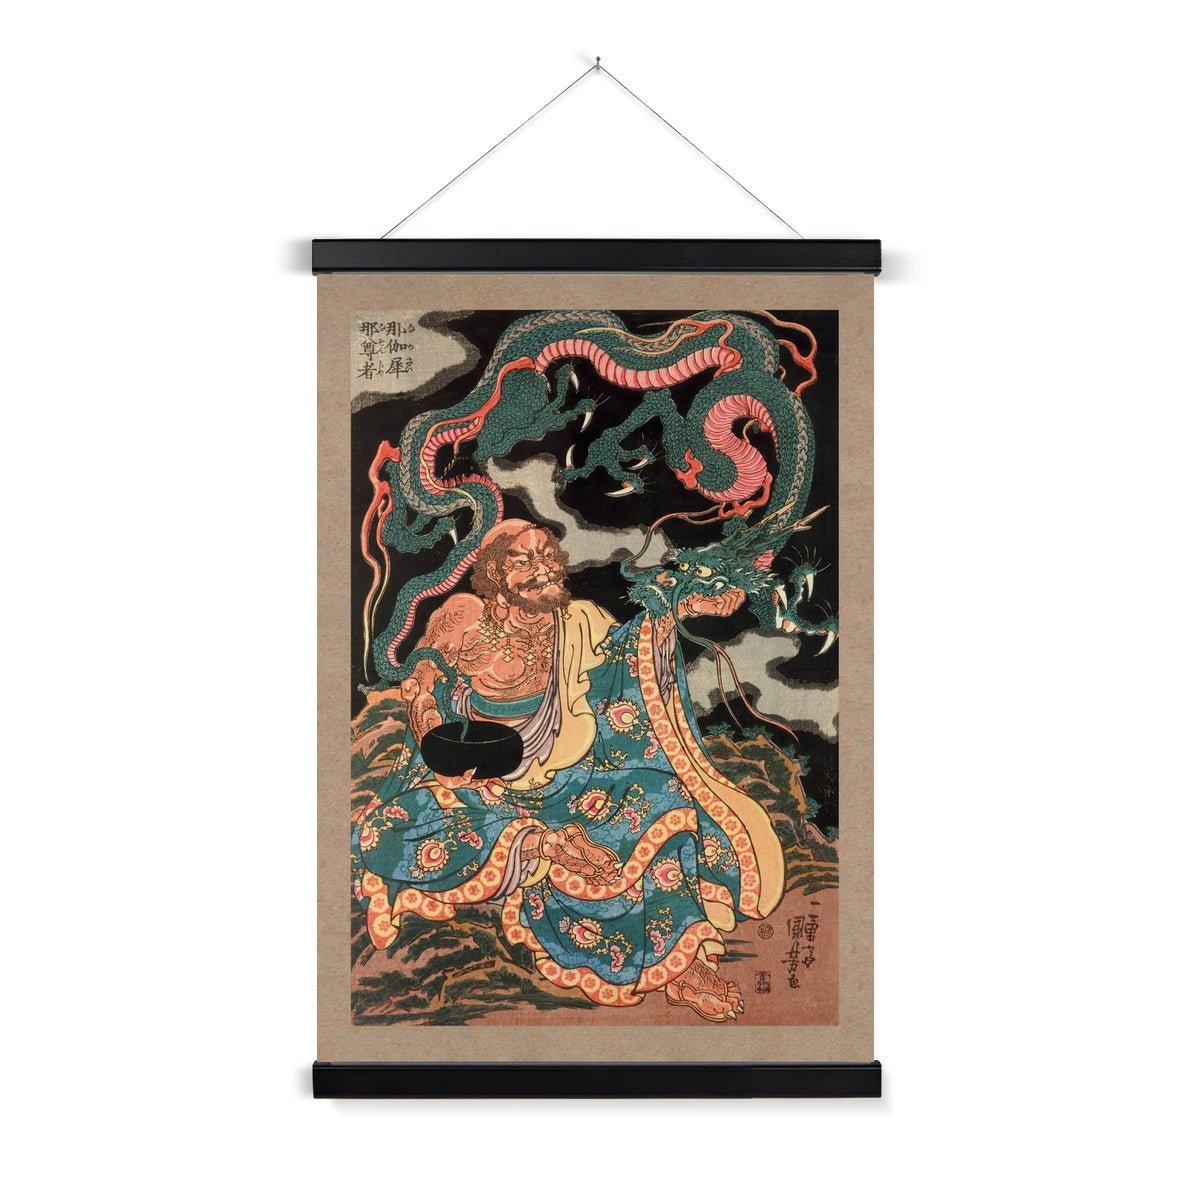 Fine art 6"x8" / Black Frame The Arhat Nakasaina Sonja Seated On a Rock, with a Dragon Emerging From His Bowl, Vintage Buddhist Japanese Fine Art Print with Hanger